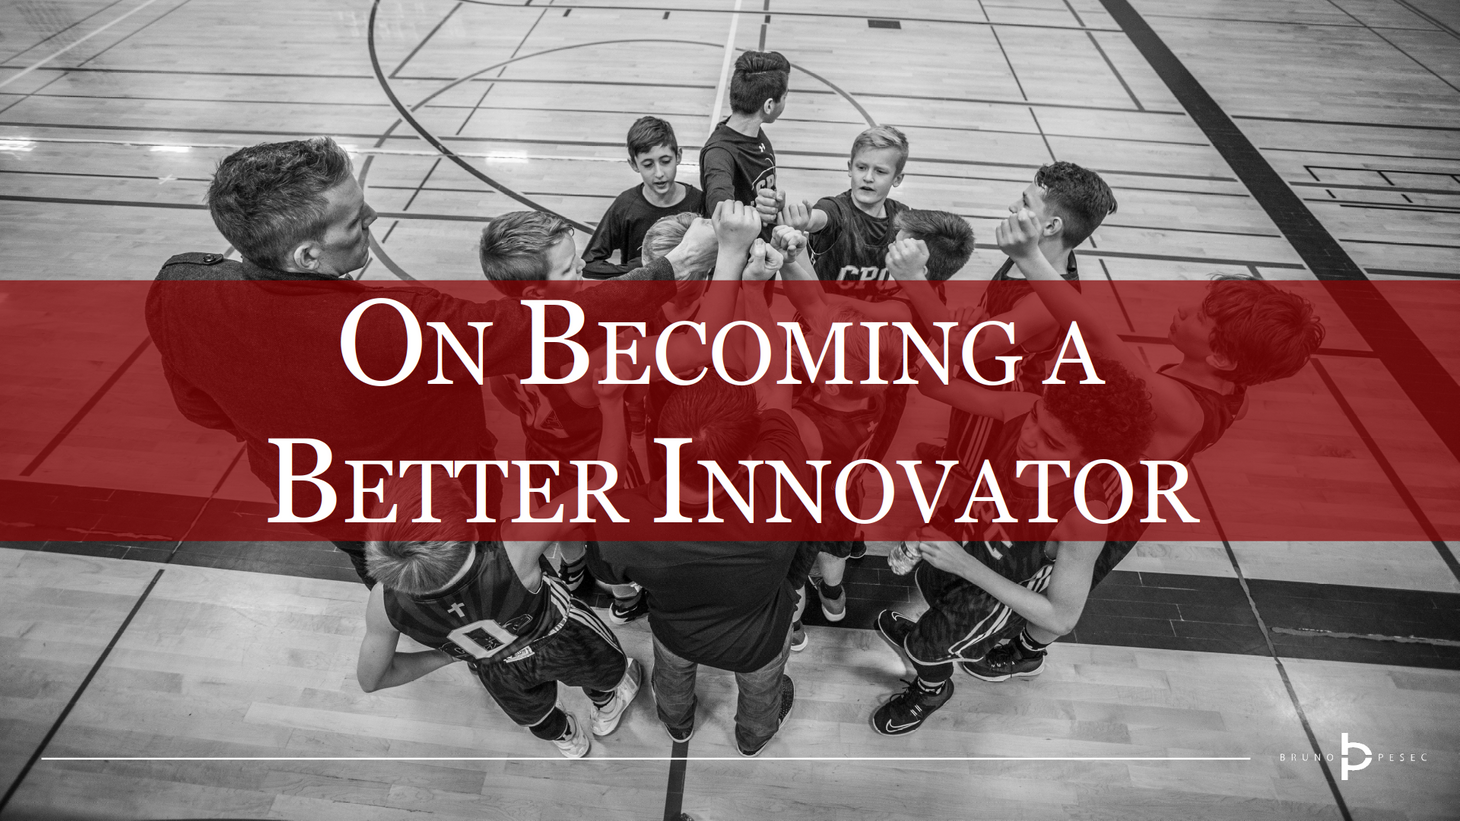 On becoming a better innovator